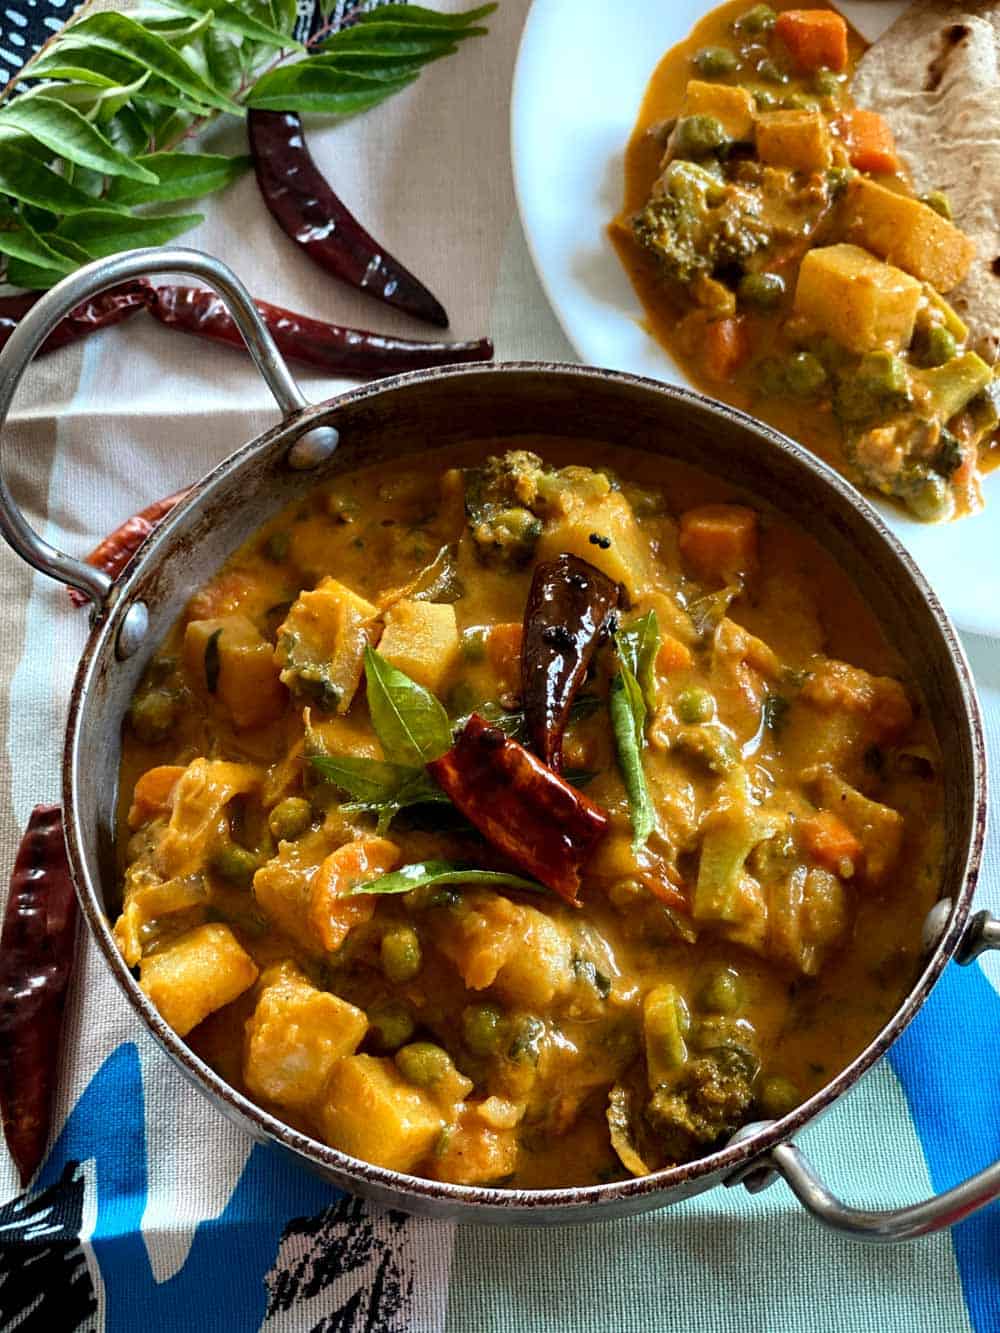 Mixed vegetable curry with coconut milk served with chapathi